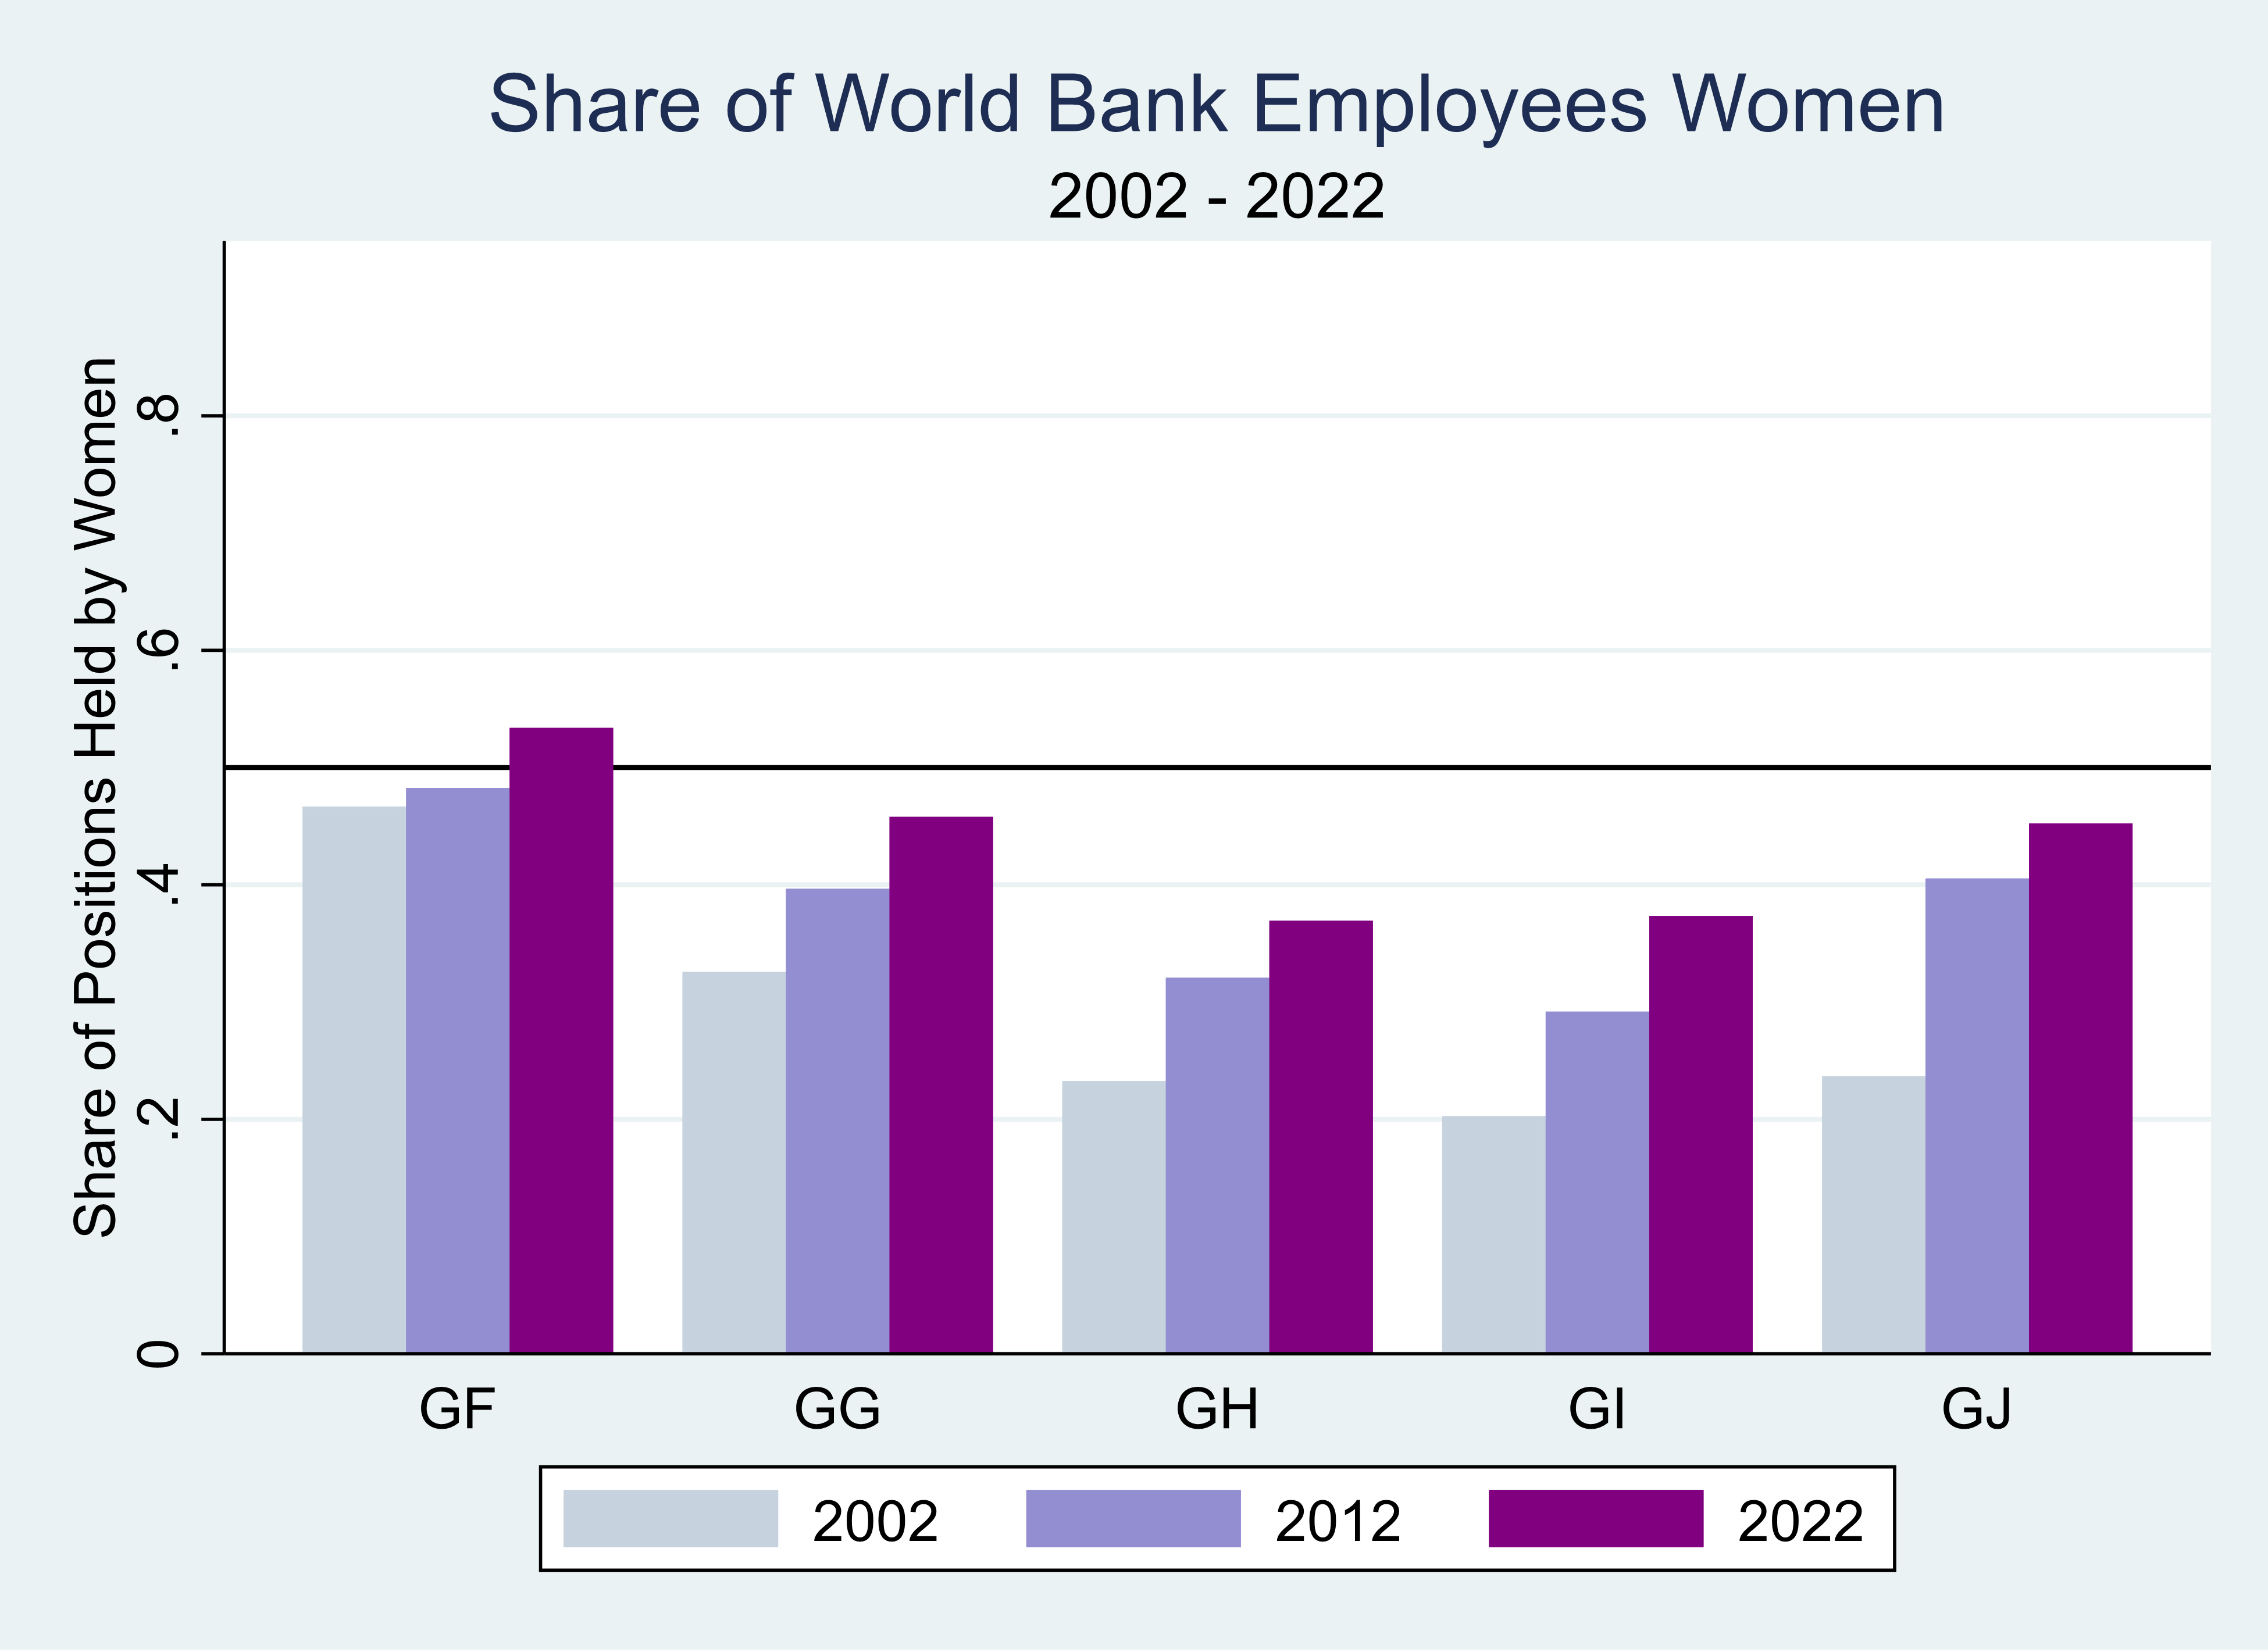 Share of World Bank Employees Who Are Women, 2002-2022